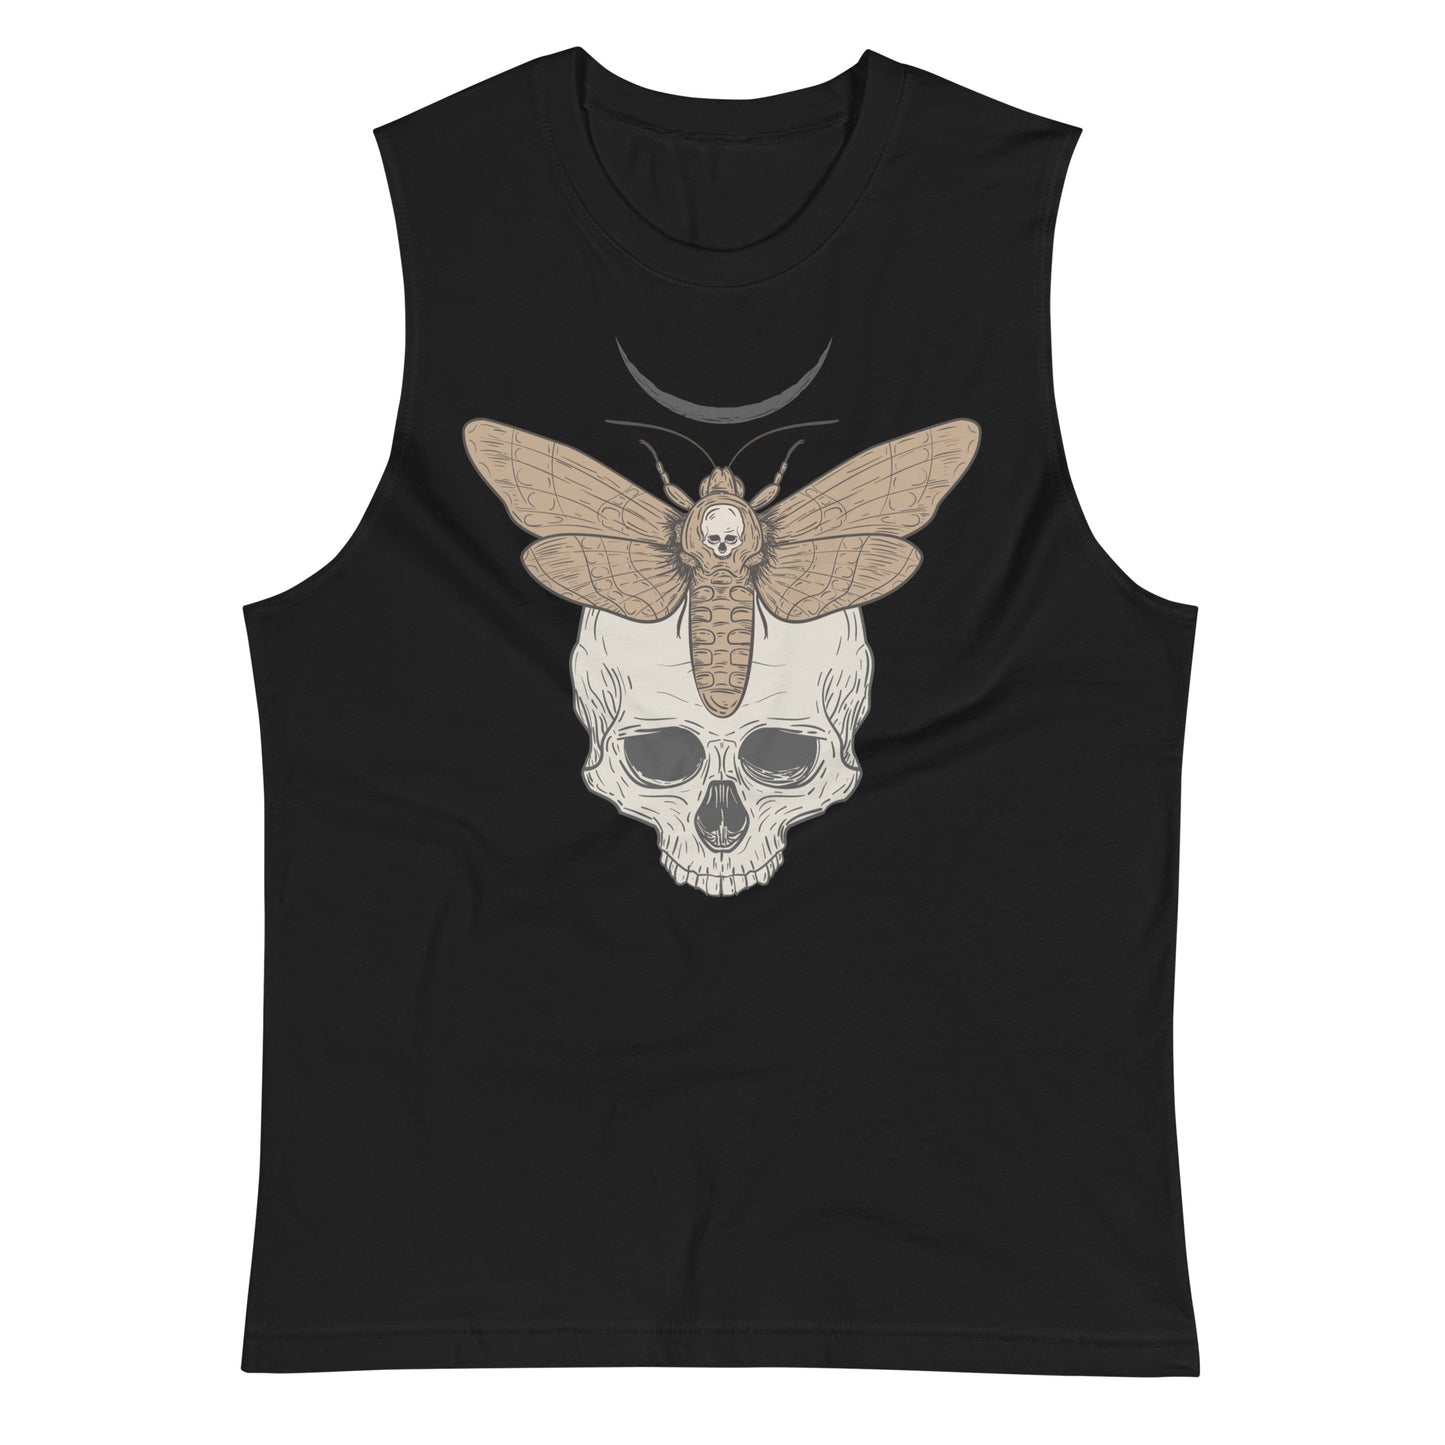 Deathmoth and Skull Muscle Shirt